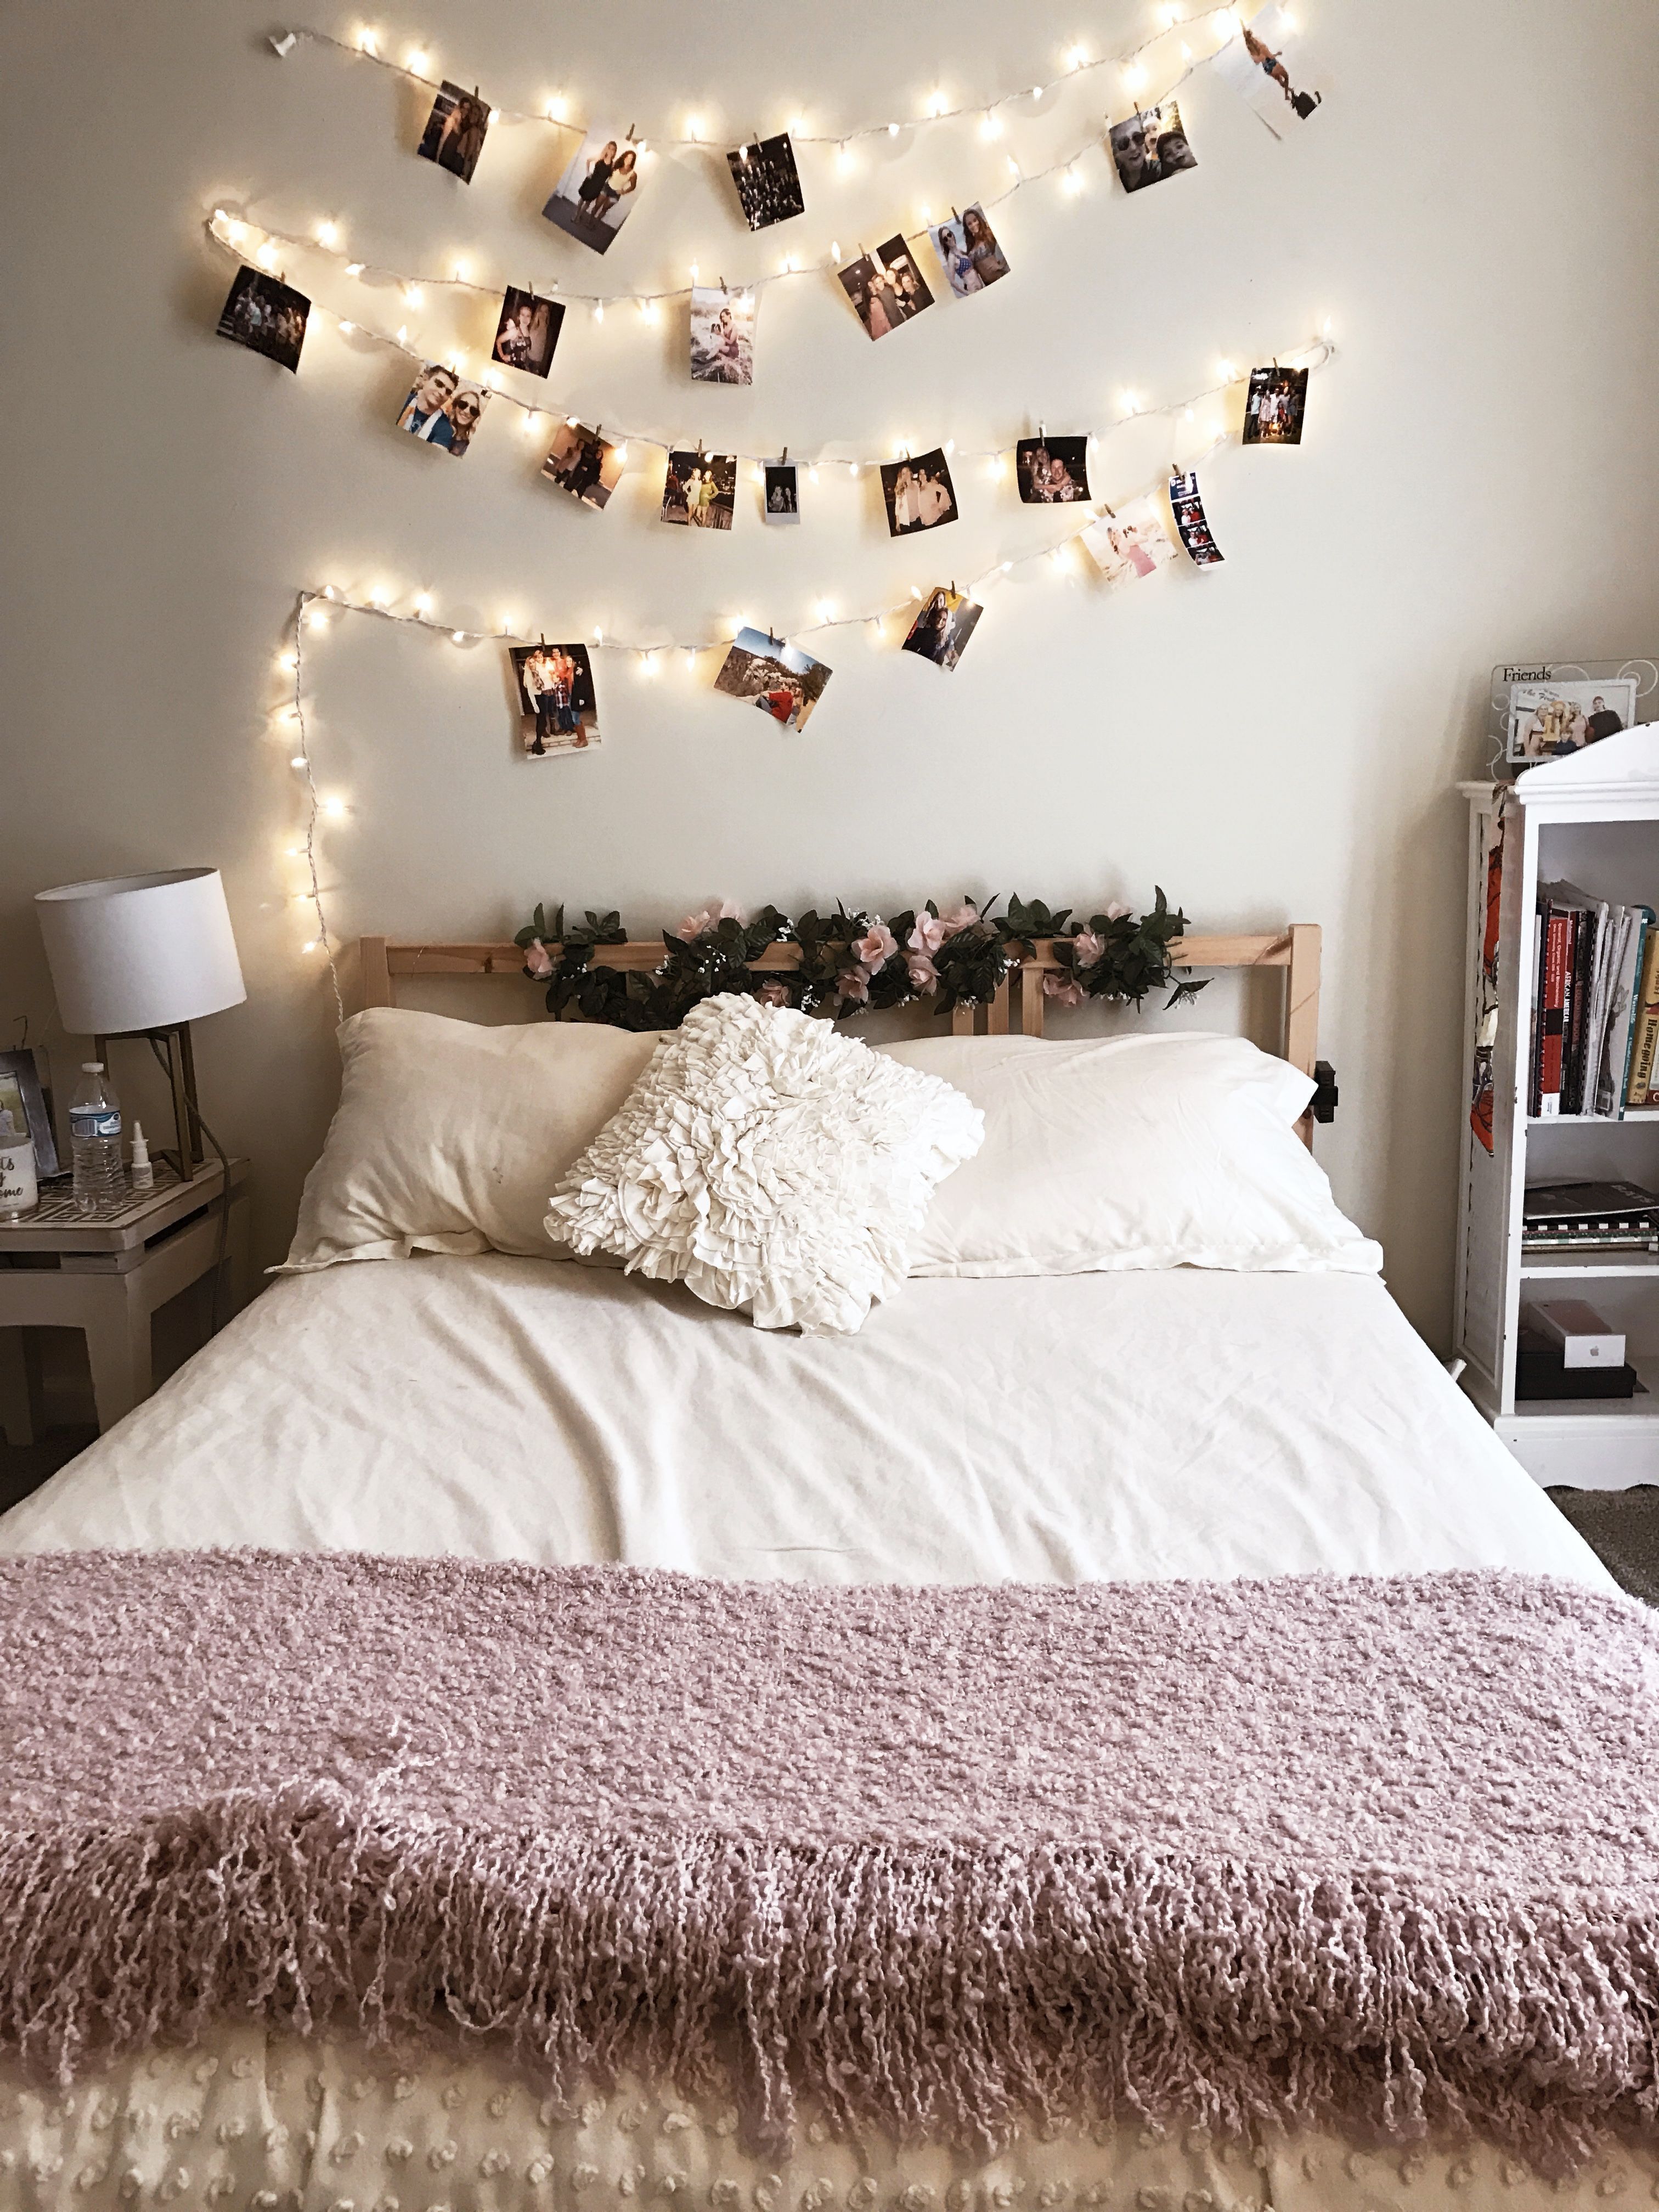 Cute Lights And Bedroom Bedding Urban Outfitters -   14 room decor For Couples beds ideas